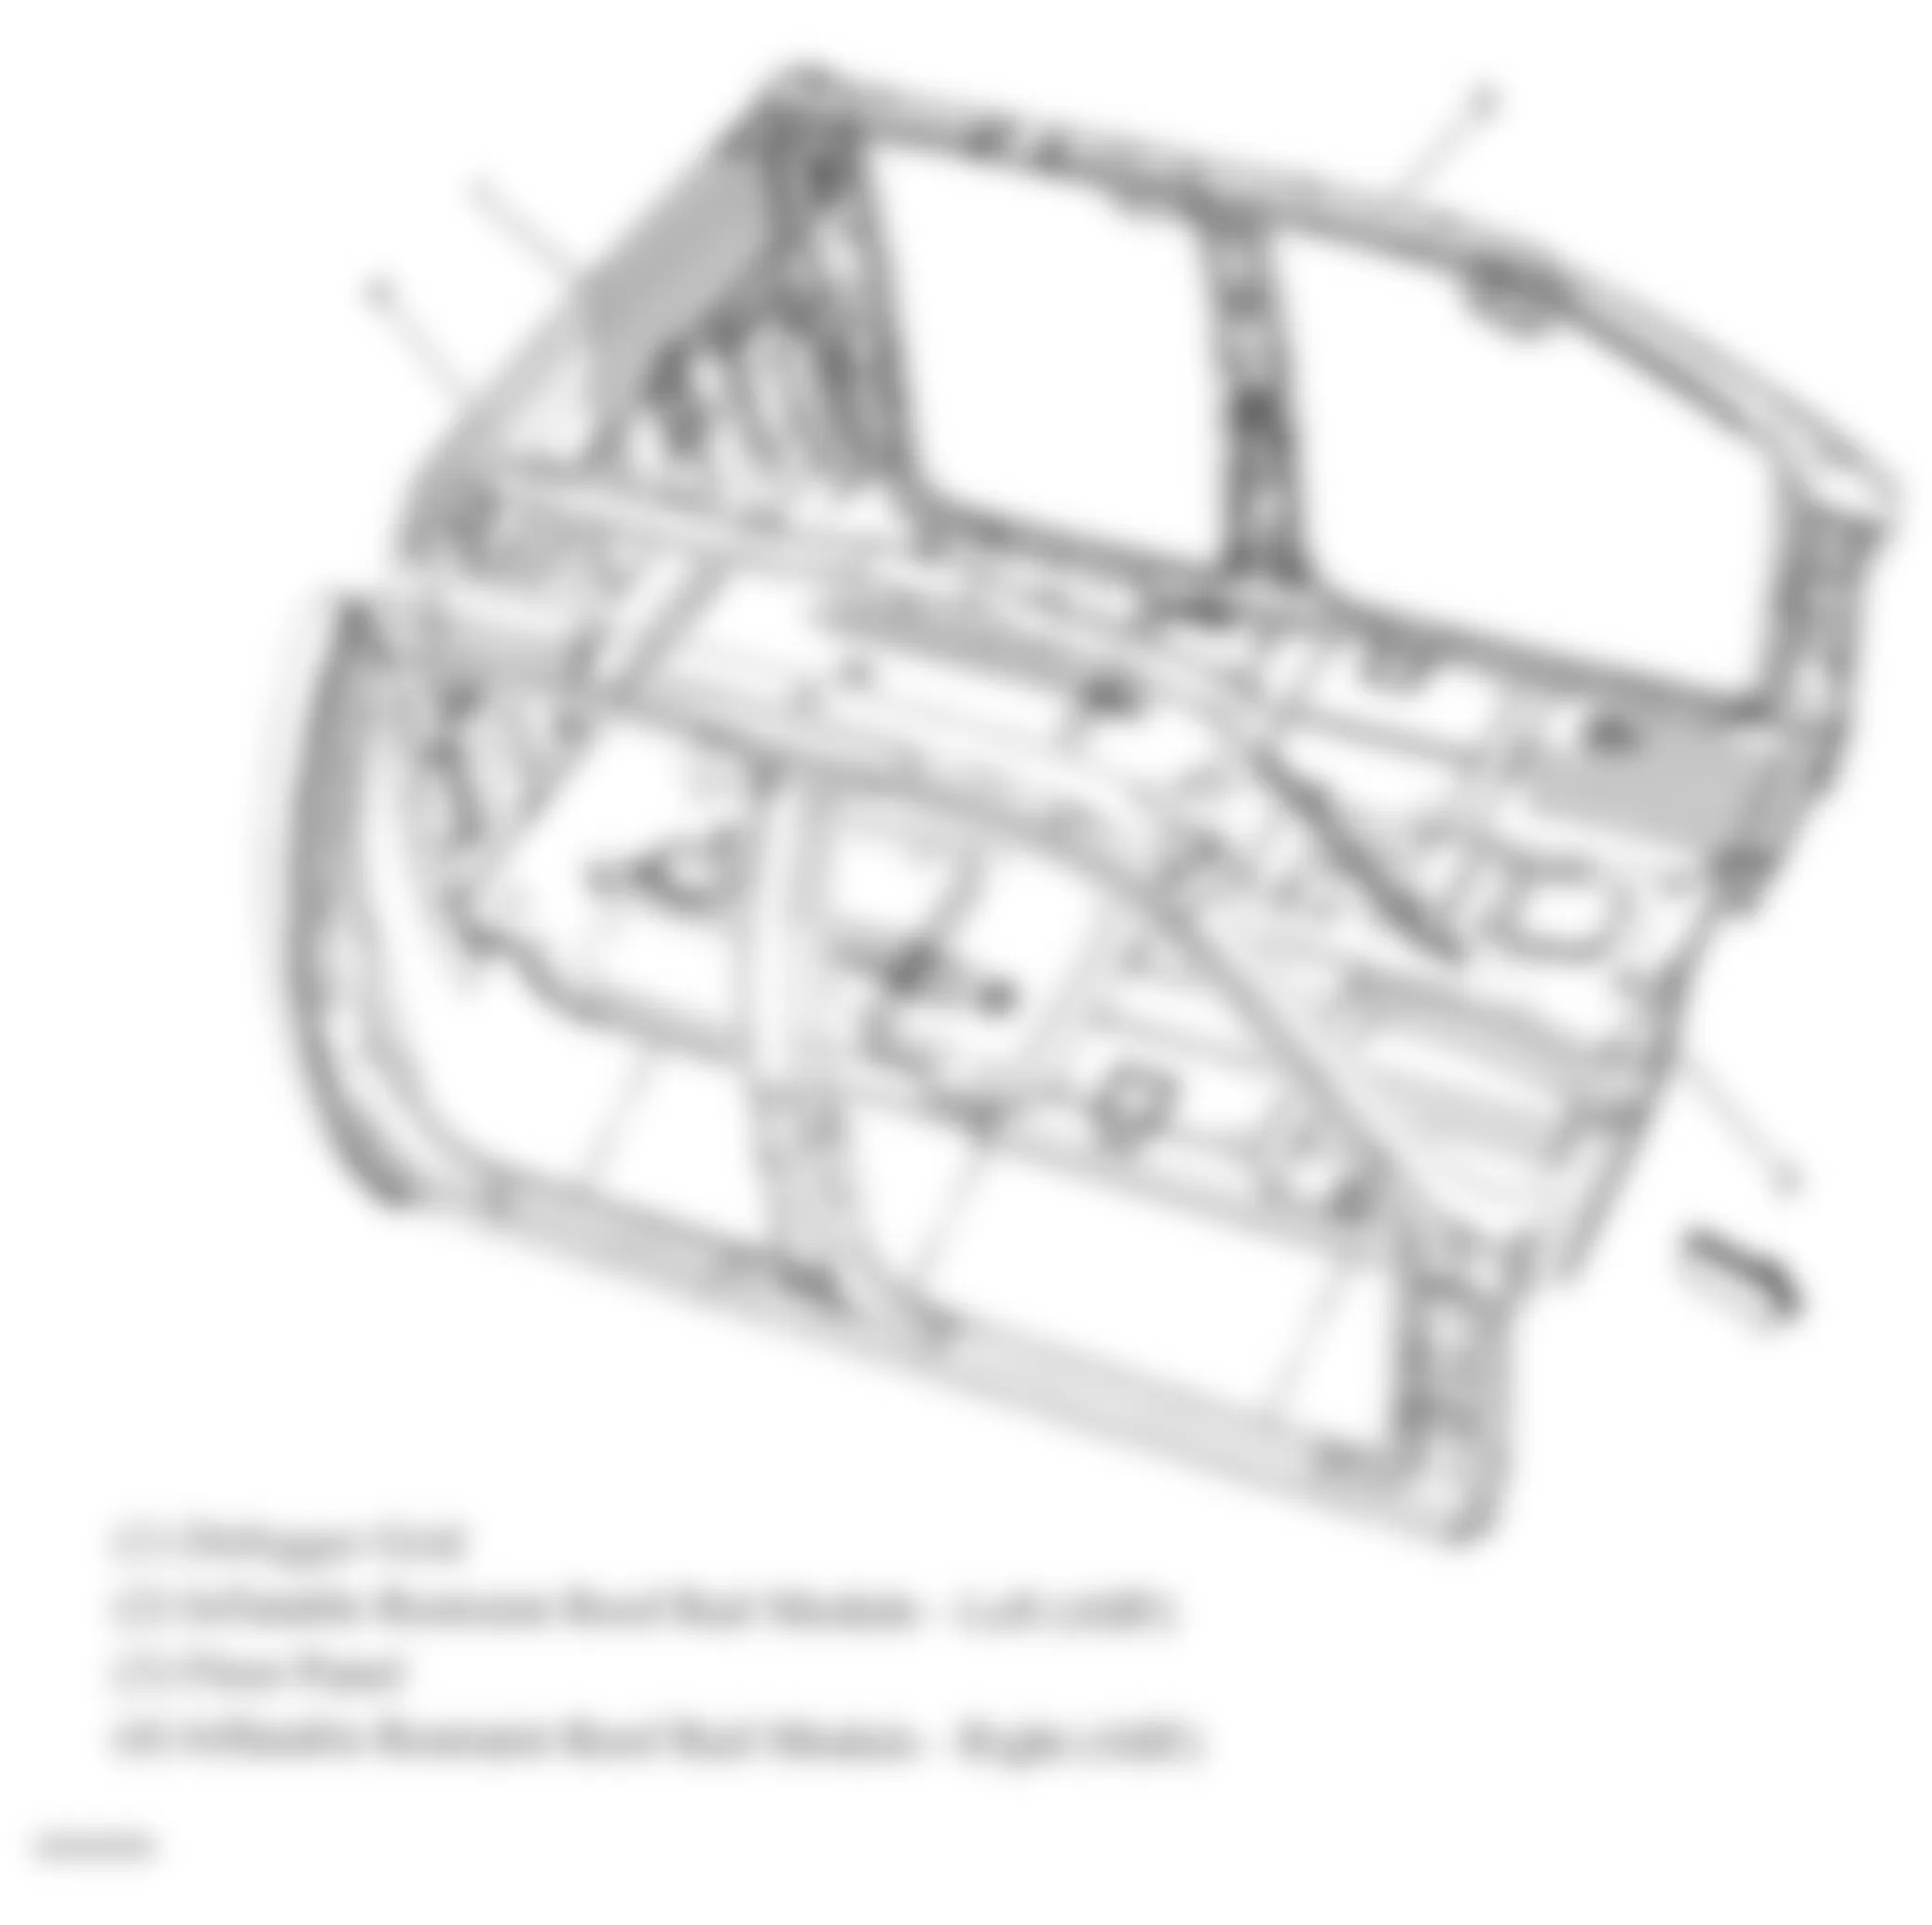 Chevrolet Silverado 1500 2009 - Component Locations -  Roof Rail Air Bags (Extended Cab & Crew Cab)